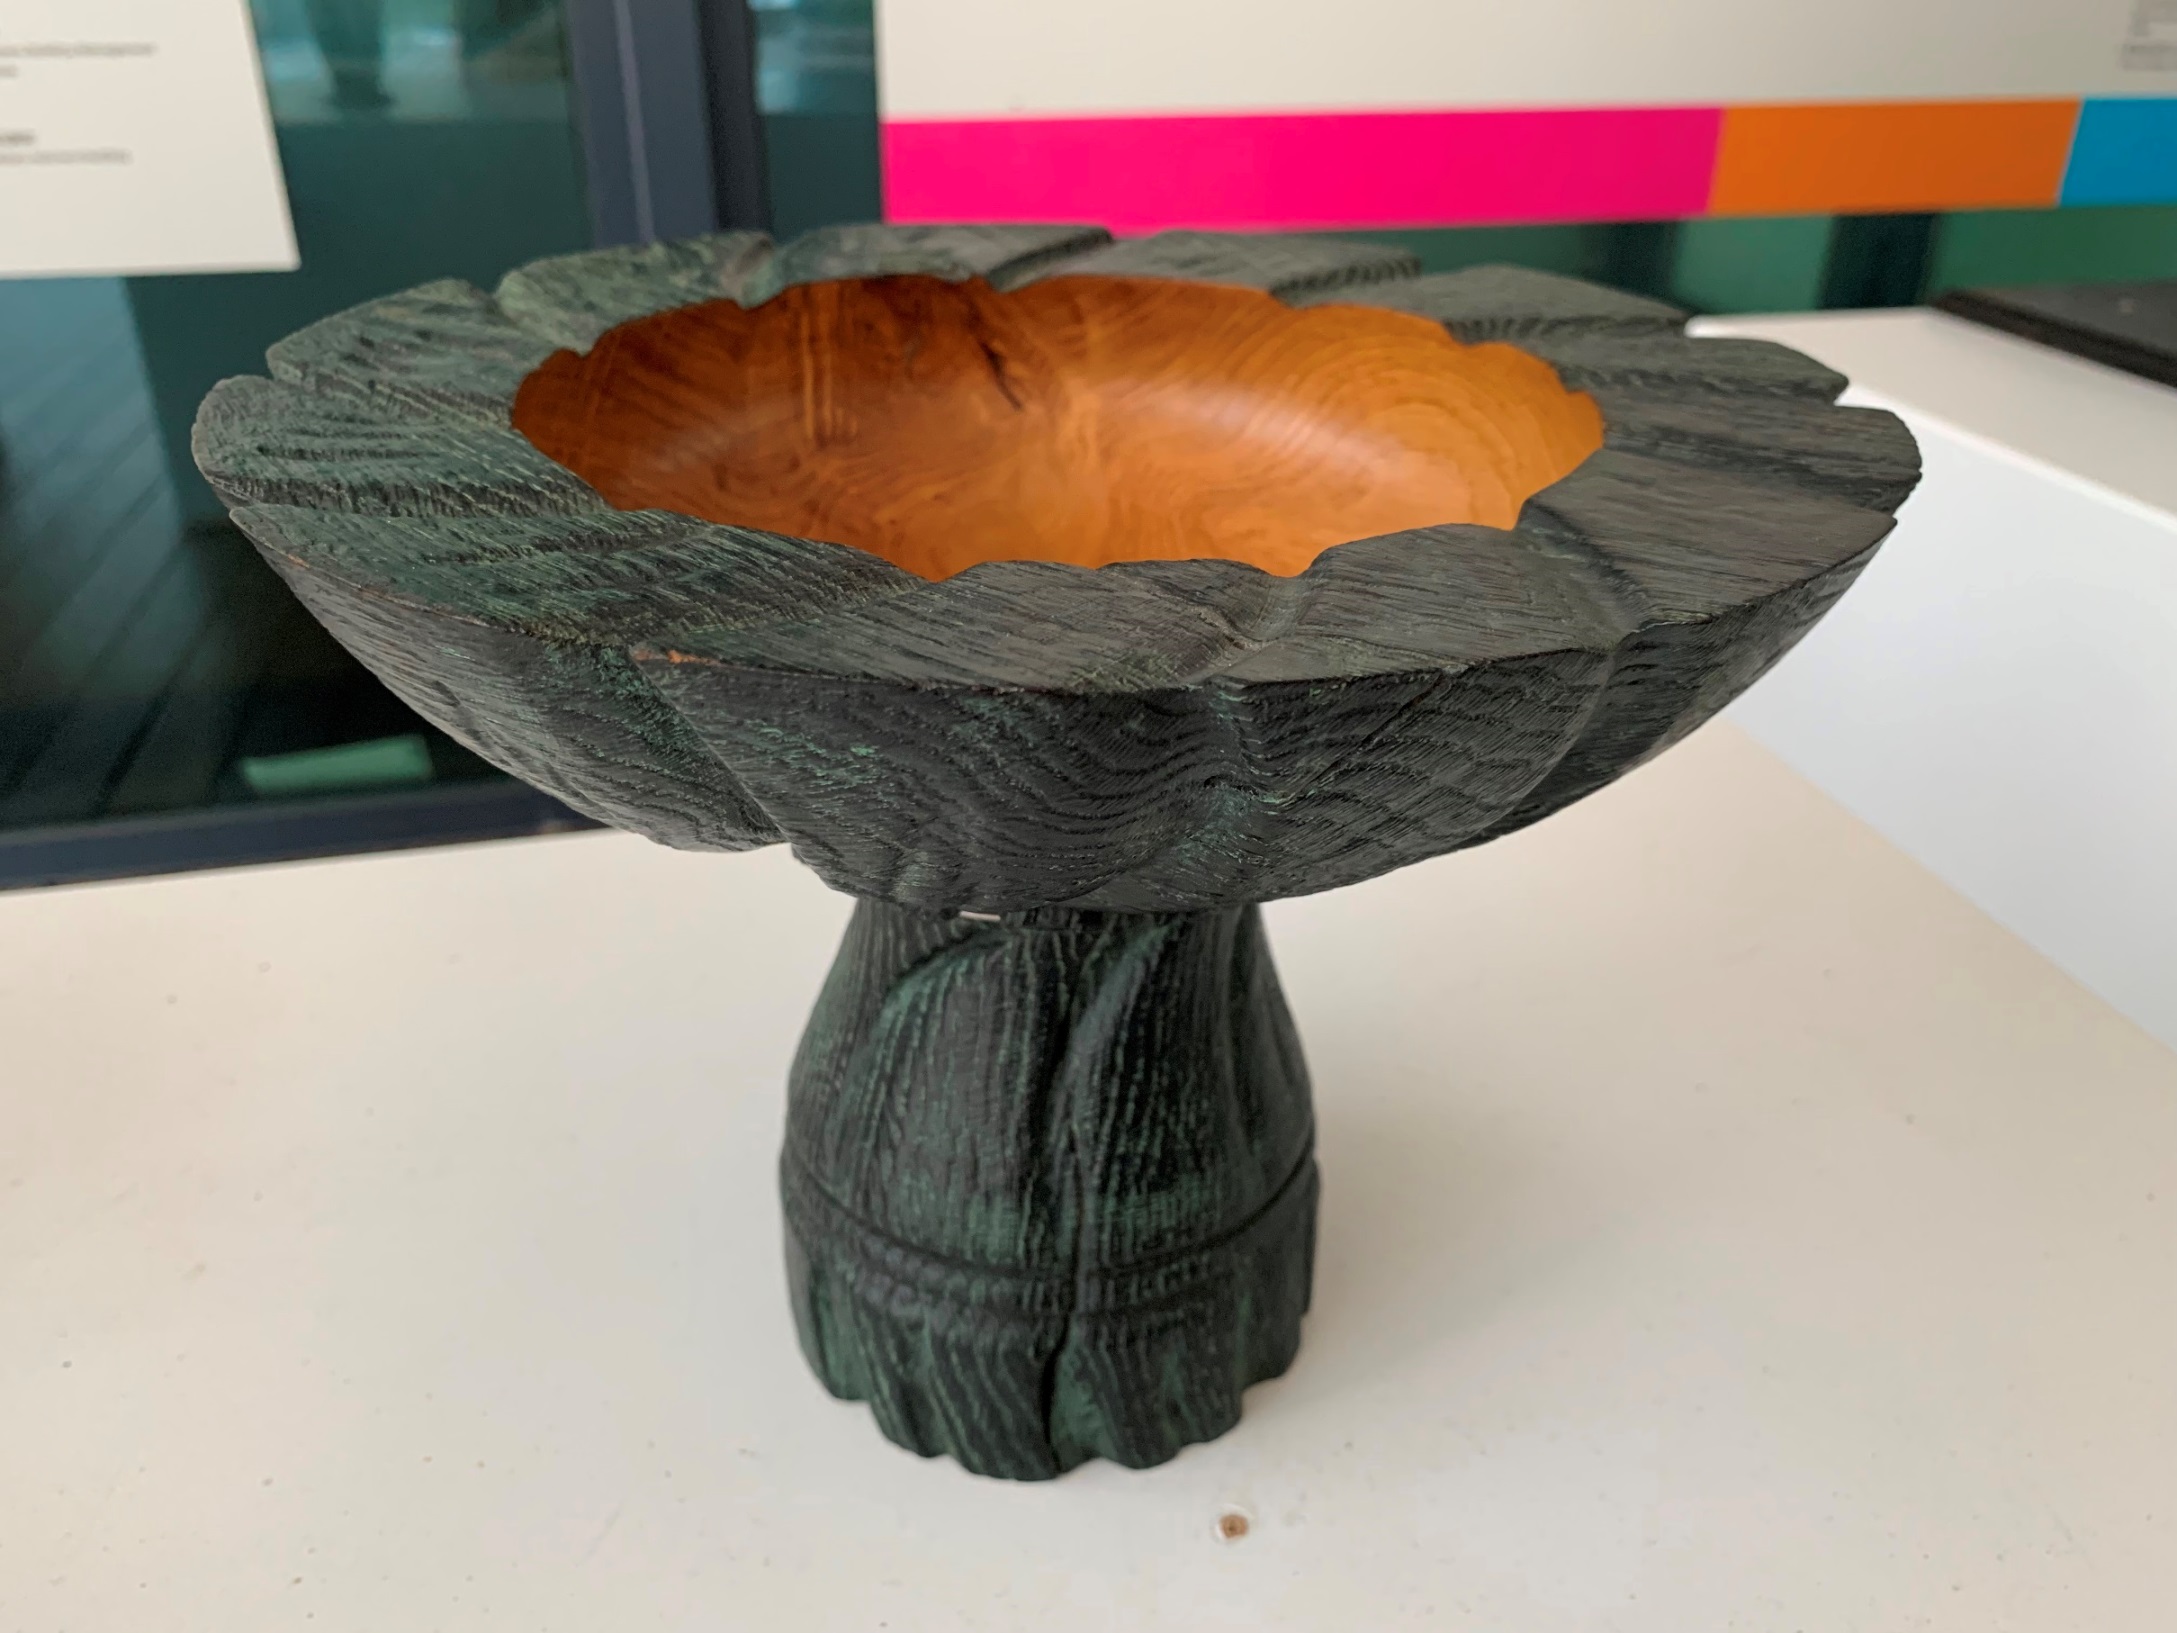 【Pedestal Bowl】Irish white oak is difficult to dry without splitting or checking. To present a natural finish, the artist carved petals on the pedestal to match the flower-shaped bowl. The shallowness of the bowl makes it hard to look inside, giving the impression of a noble inner beauty. by: Joe LAIRD, Wood Turner, Ireland